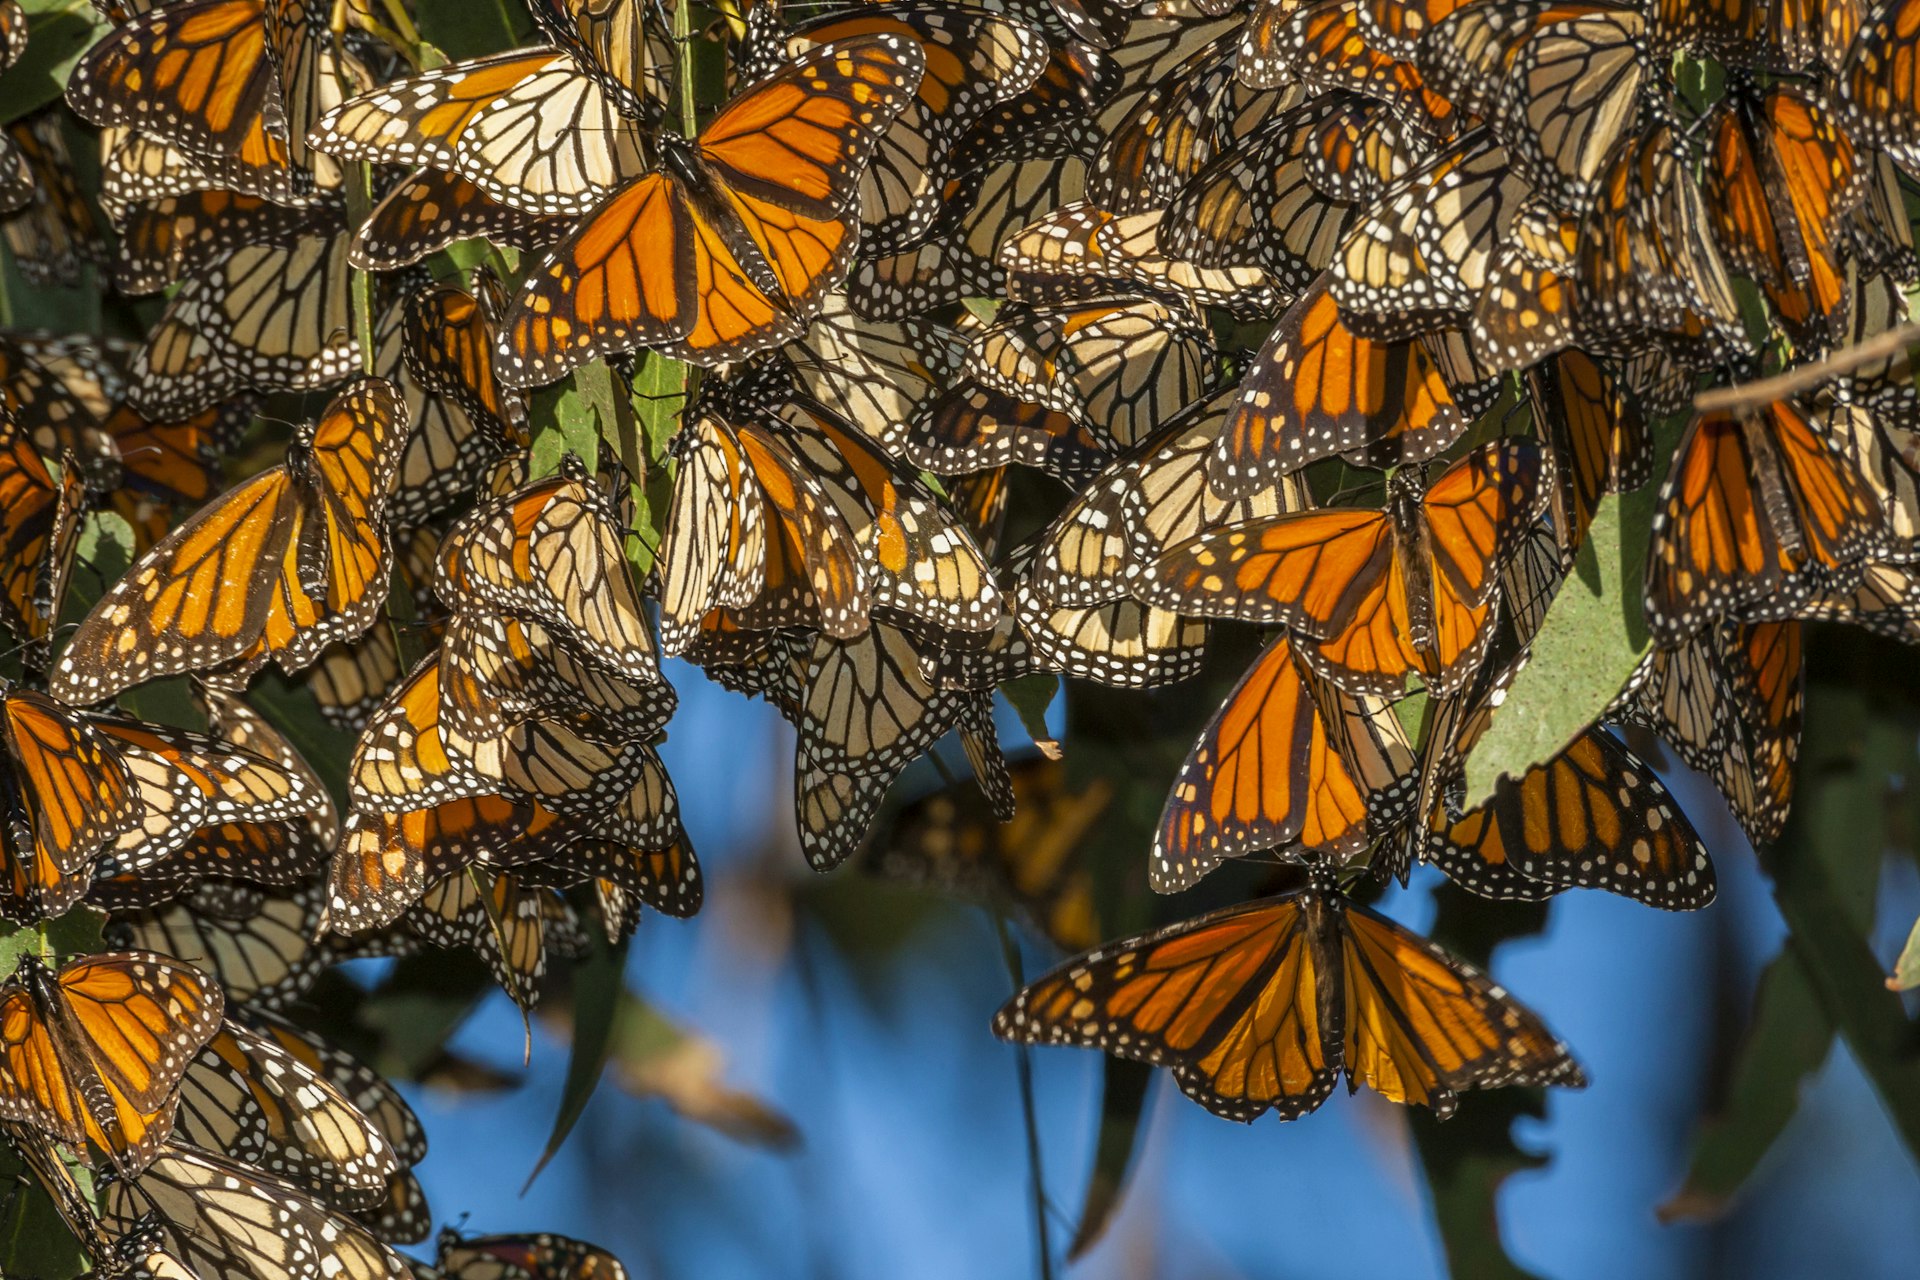 Monarch butterflies cluster together on a tree branch @ Danita Delimont / Getty Images